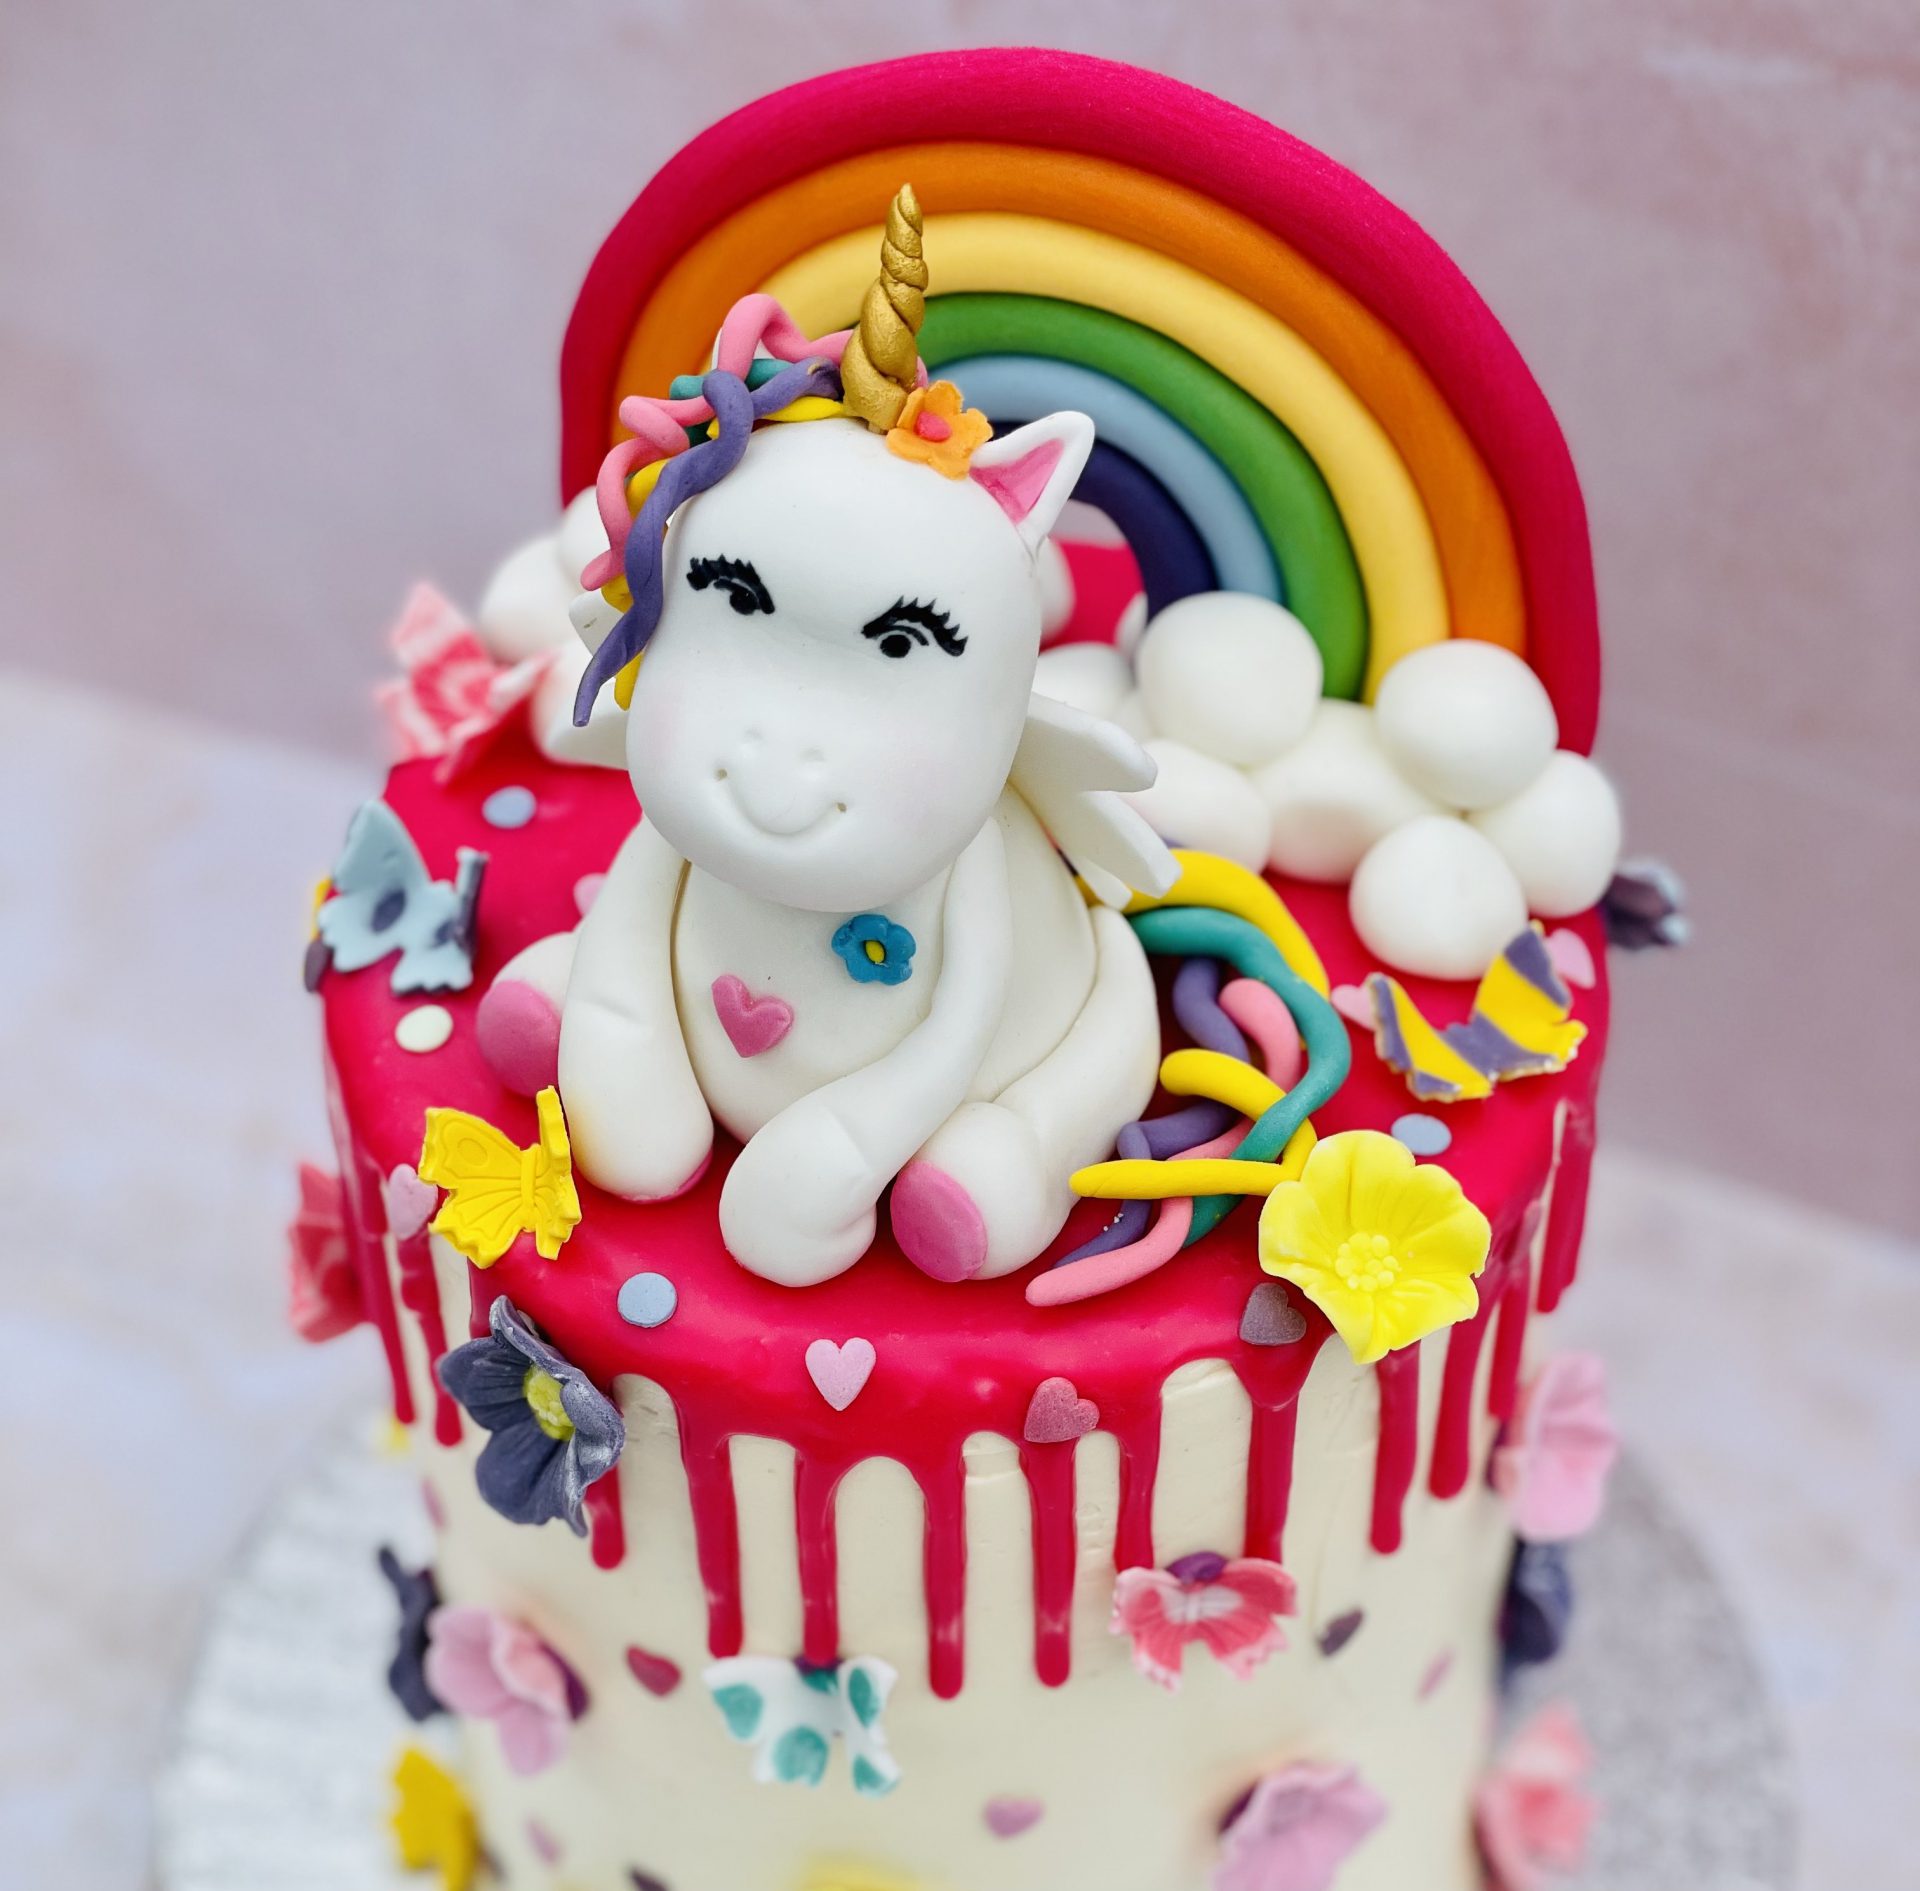 Cute unicorn cake with painted closed eyes on wooden table on dark  background — golden, party - Stock Photo | #297138348